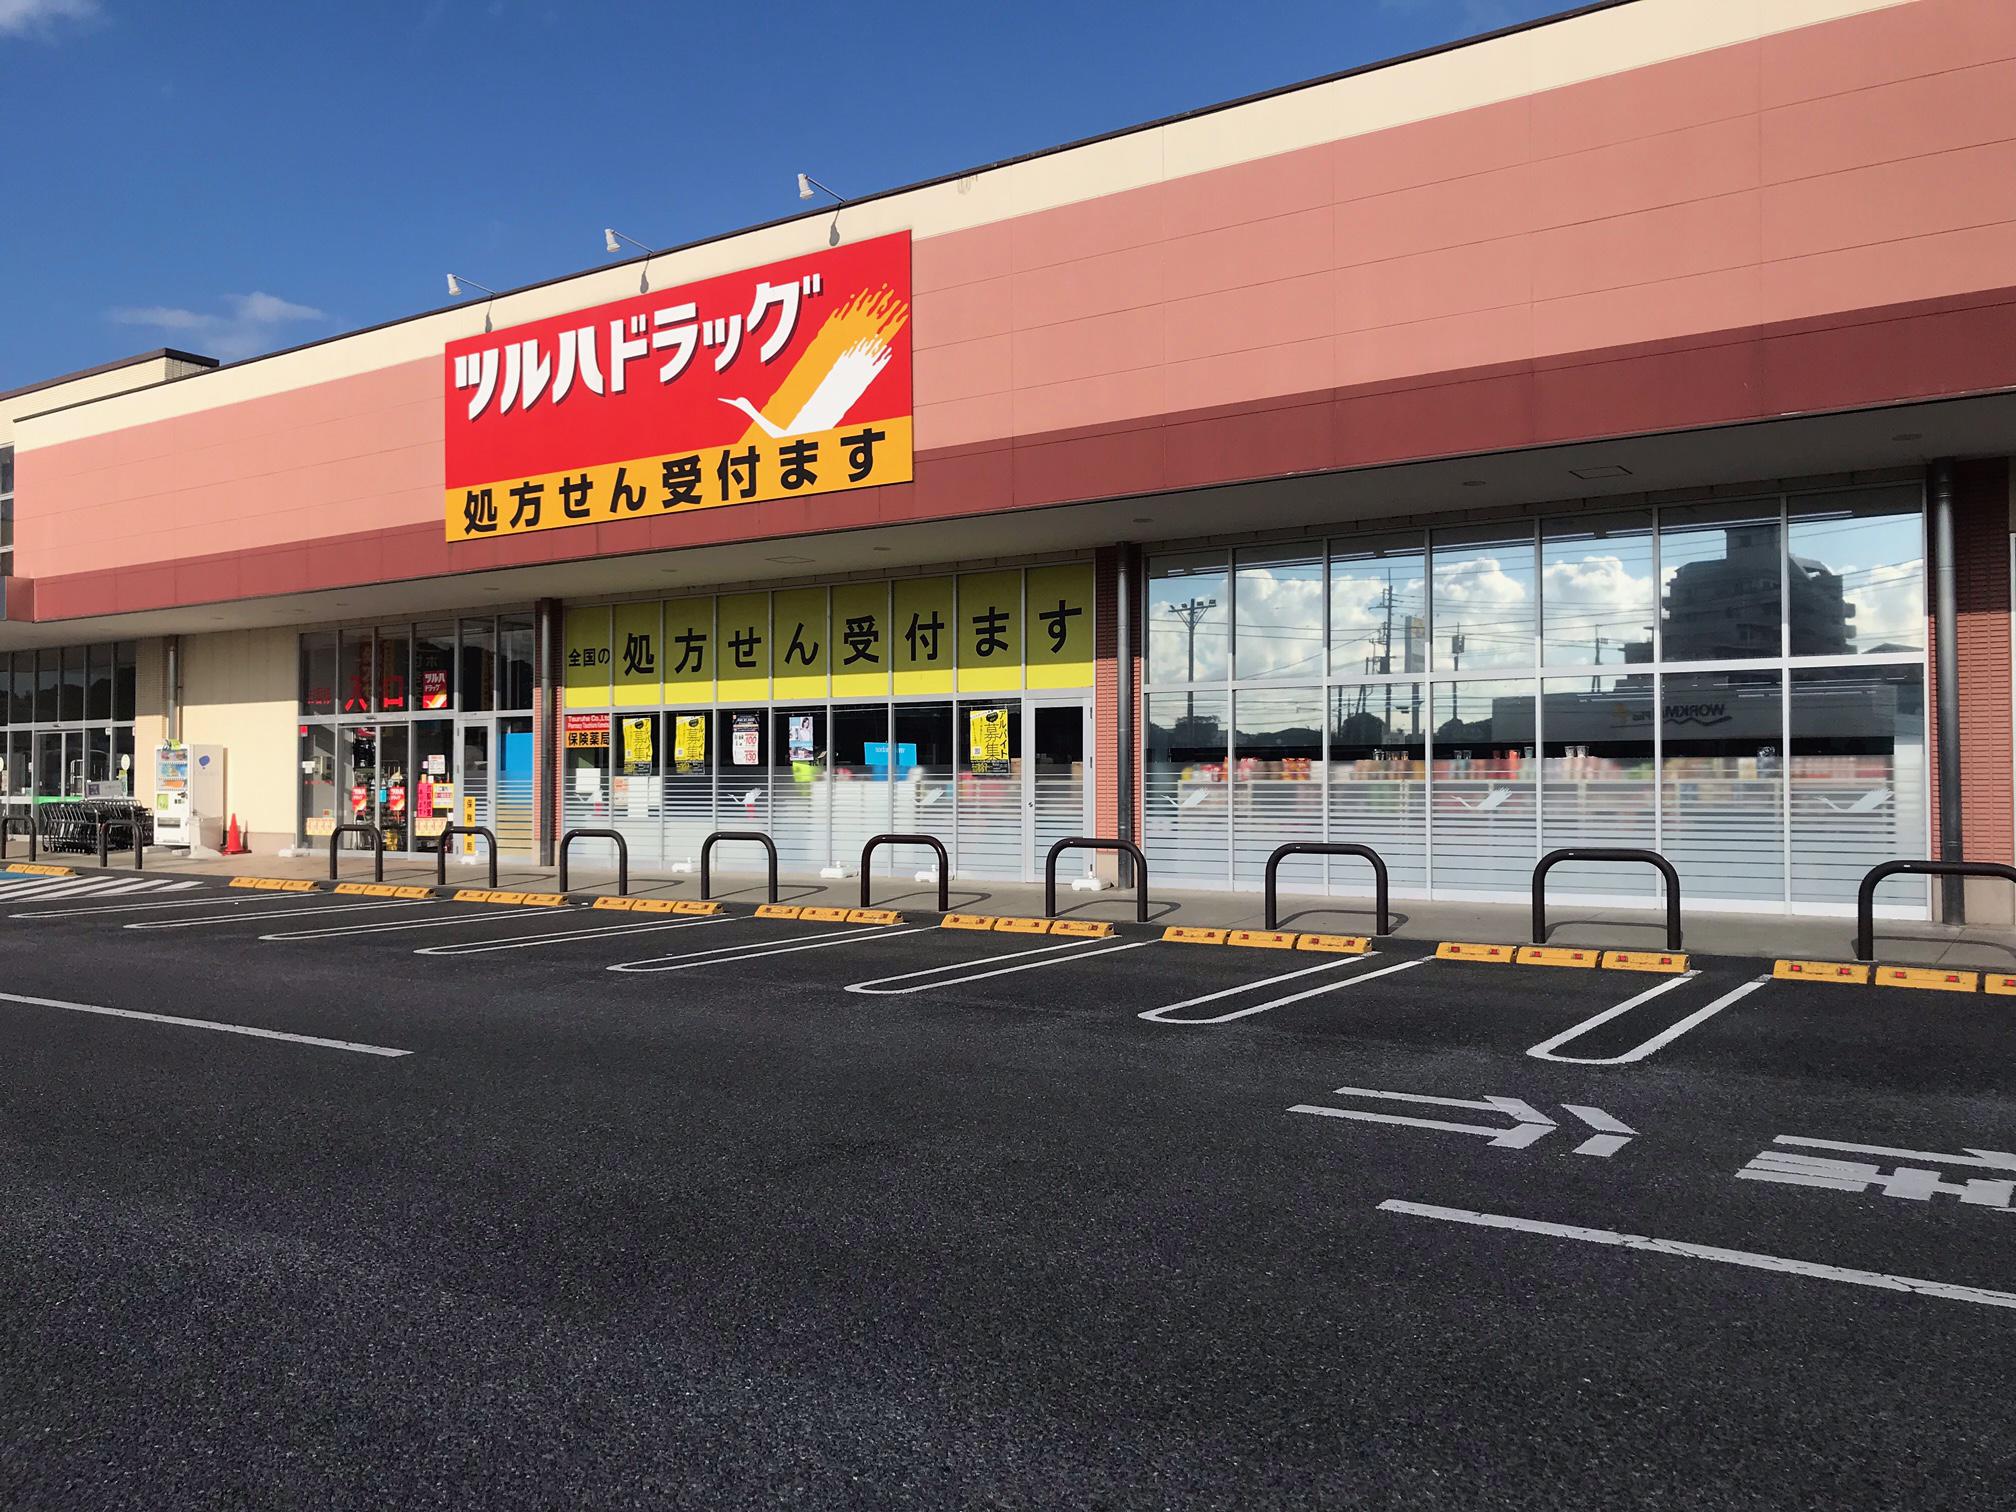 Images ツルハドラッグ 土浦小松店